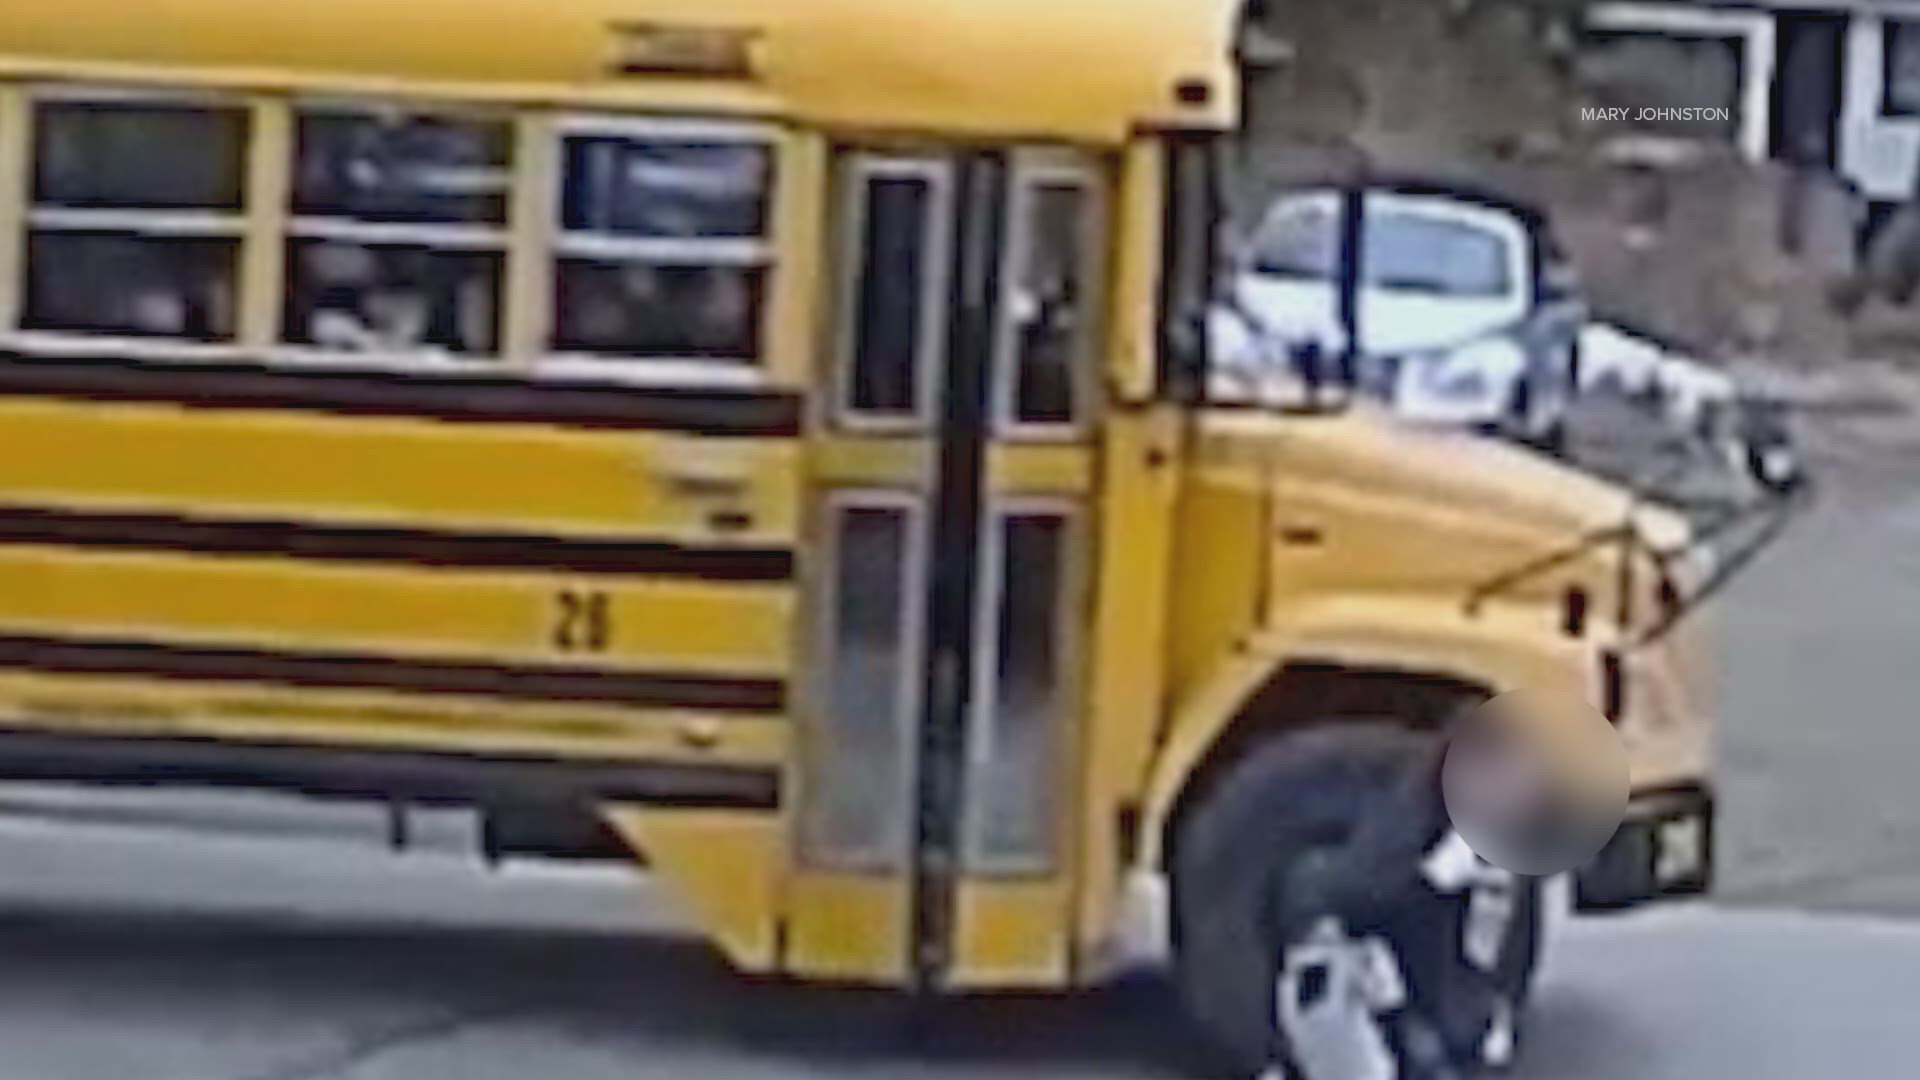 Police are investigating allegations that a 12 year-old girl was pushed off her school bus by the bus driver.